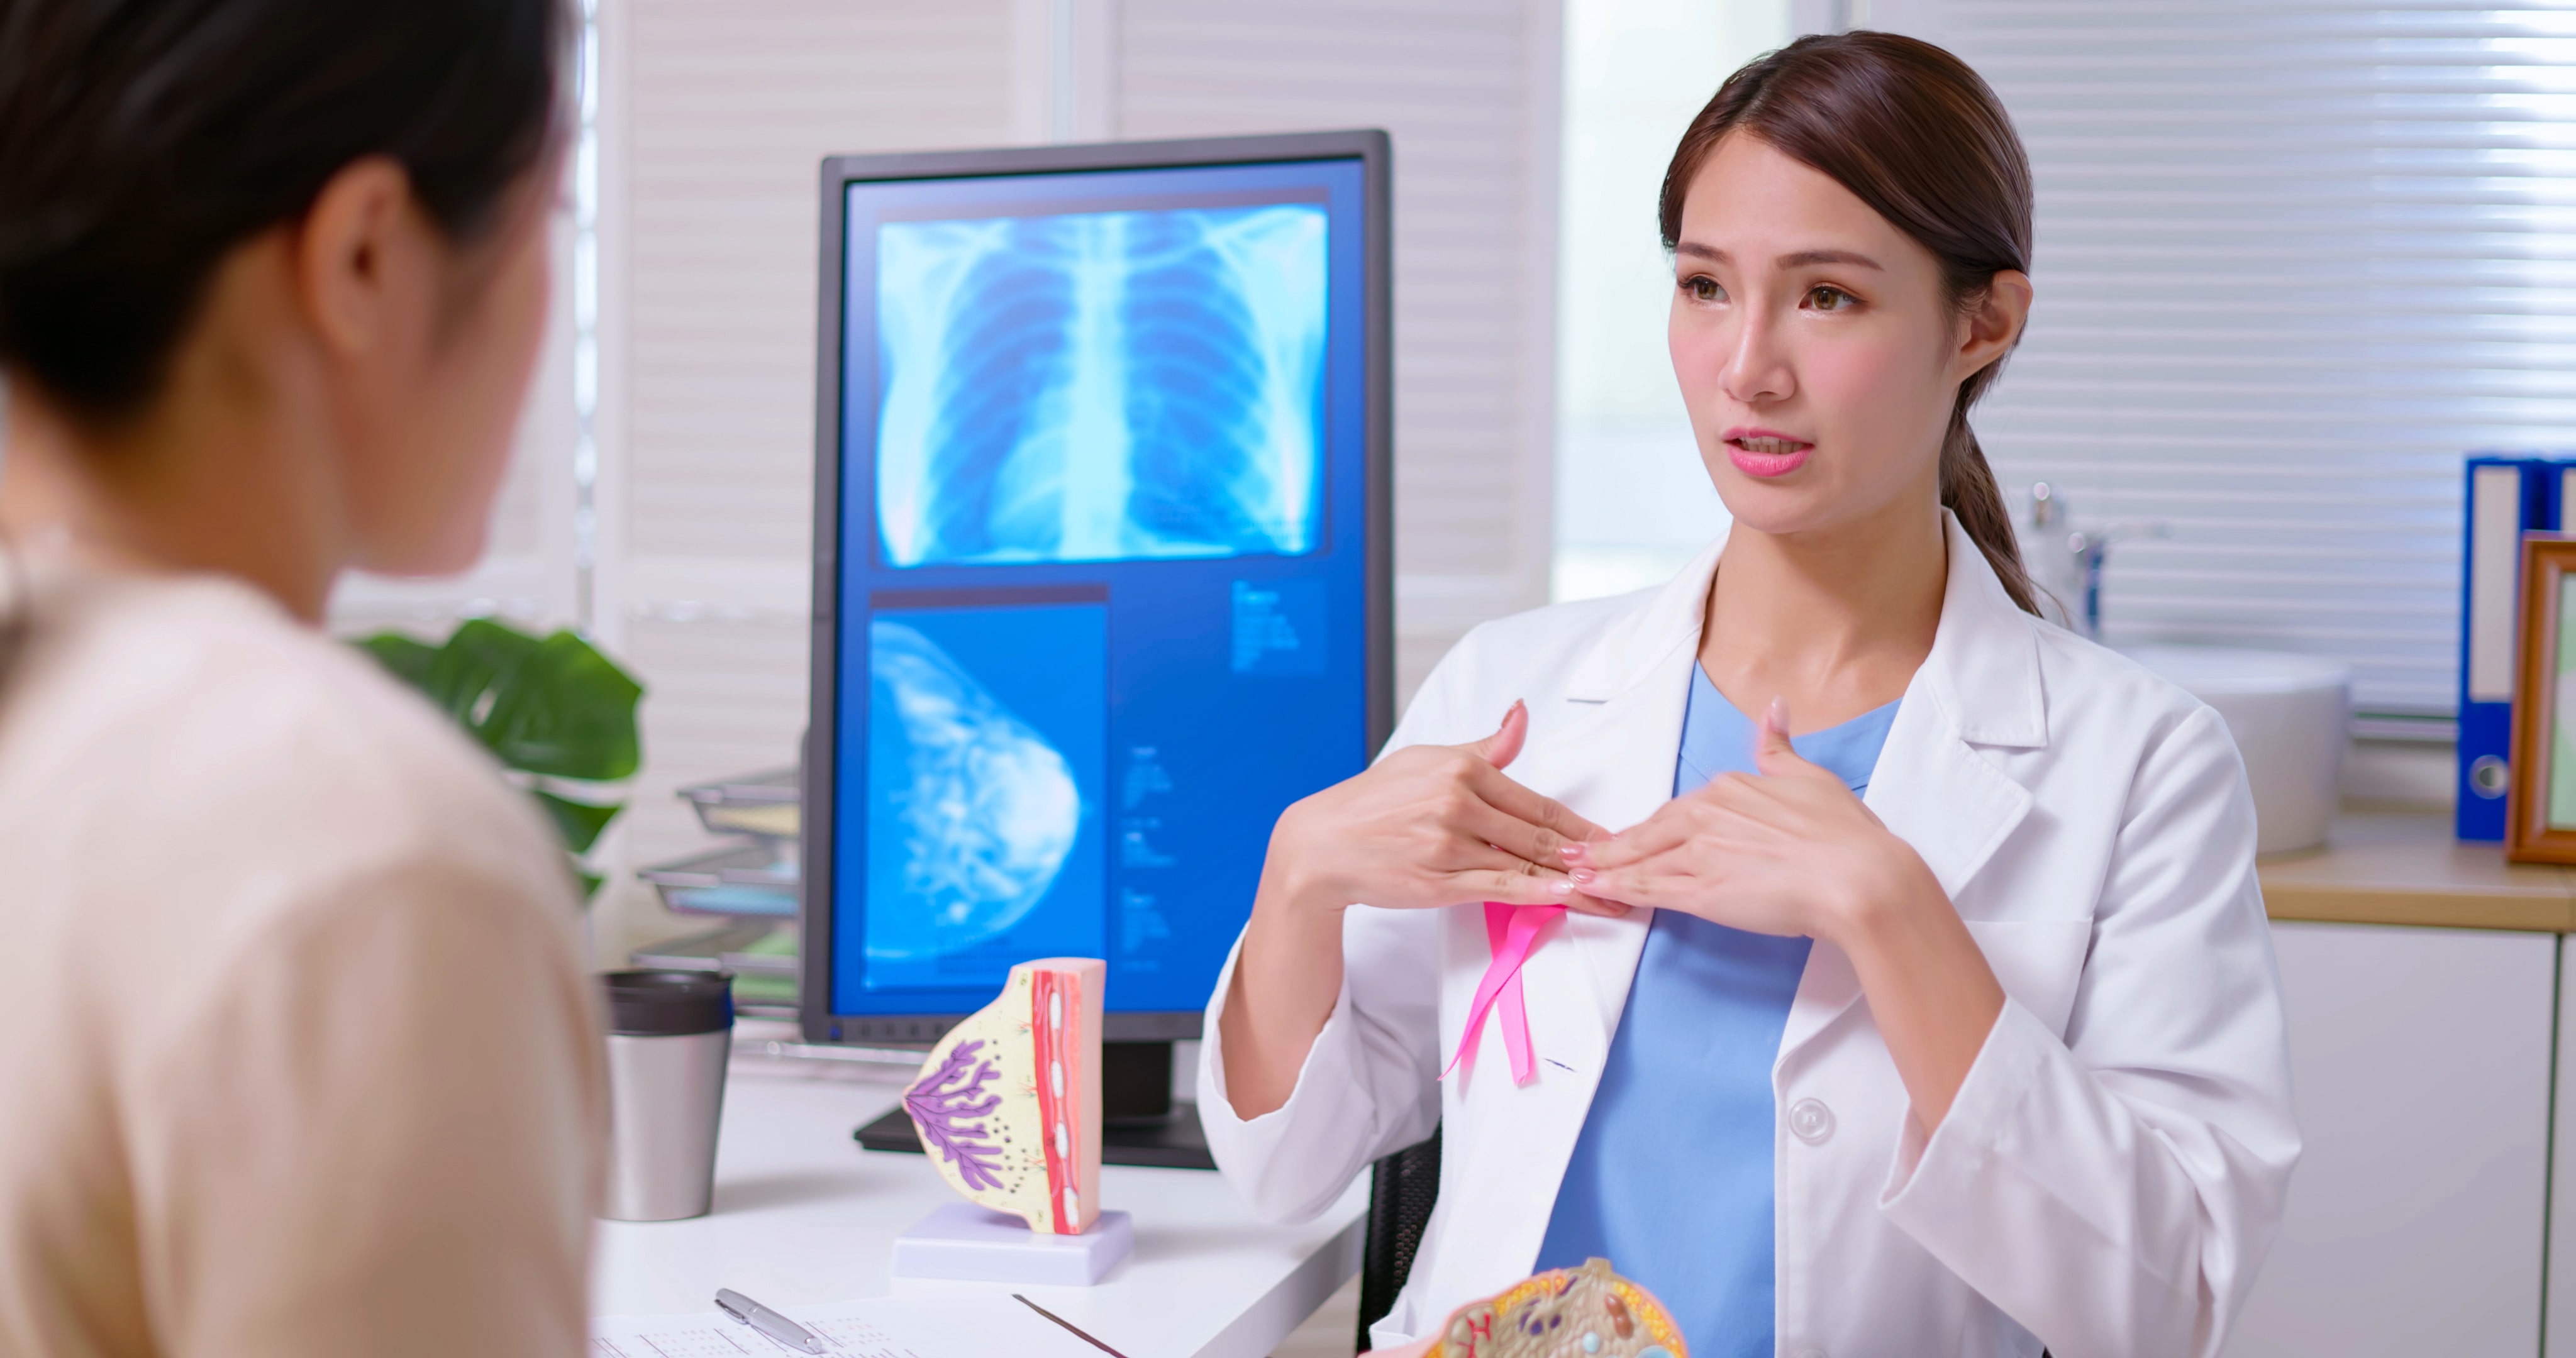 How Can Wellness Program Aid in the Early Detection of Breast Cancer?